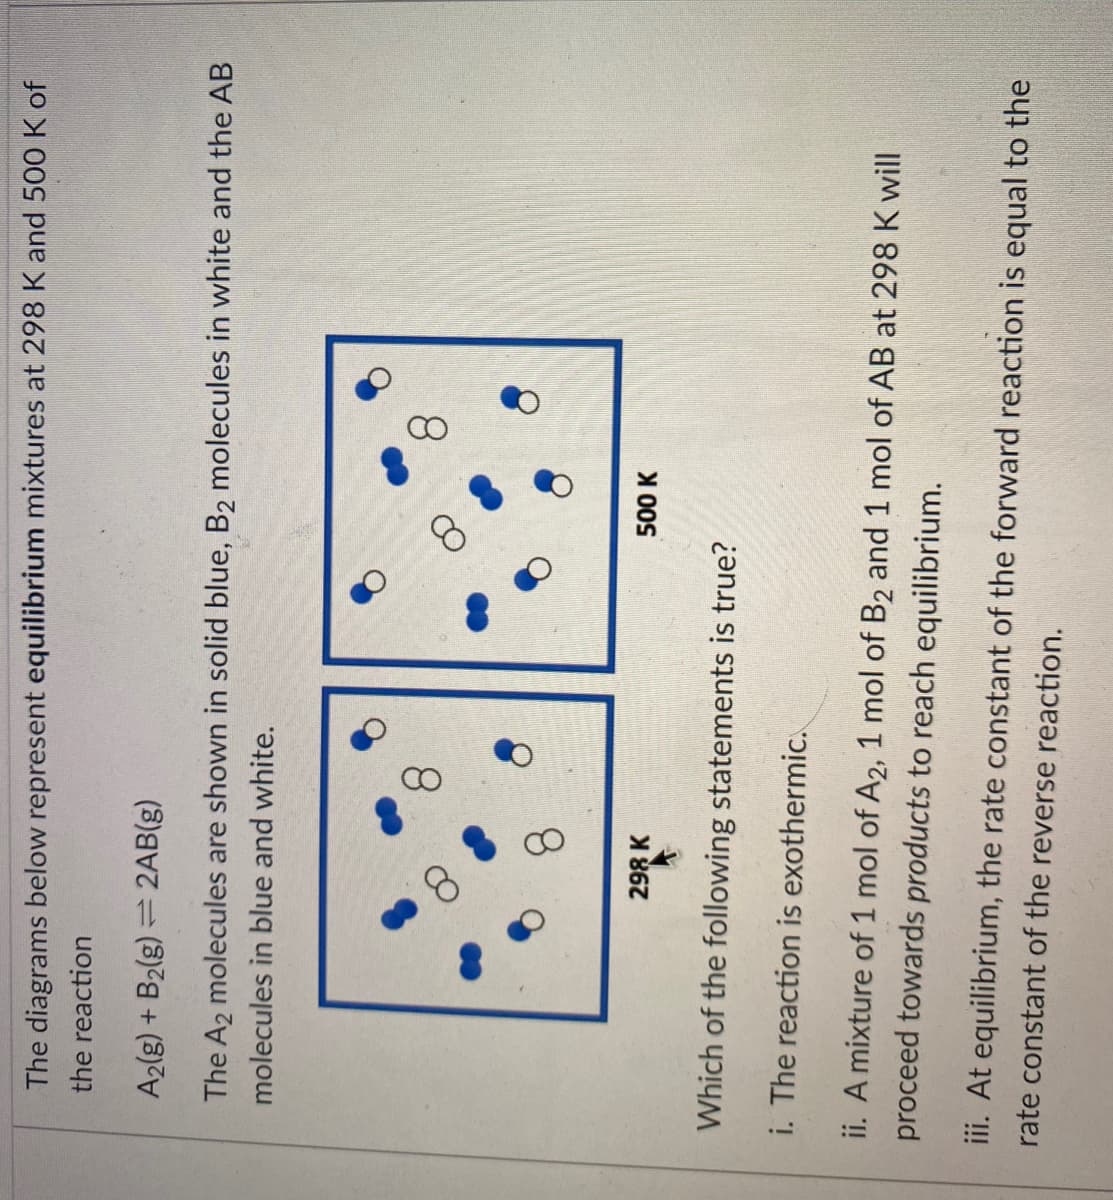 8.
The diagrams below represent equilibrium mixtures at 298 K and 500 K of
the reaction
A2(g) + B2(g) = 2AB(g)
The A2 molecules are shown in solid blue, B2 molecules in white and the AB
molecules in blue and white.
8.
8.
8.
298 K
500 K
Which of the following statements is true?
i. The reaction is exothermic.
ii. A mixture of 1 mol of A2, 1 mol of B2 and 1 mol of AB at 298 K will
proceed towards products to reach equilibrium.
iii. At equilibrium, the rate constant of the forward reaction is equal to the
rate constant of the reverse reaction.
